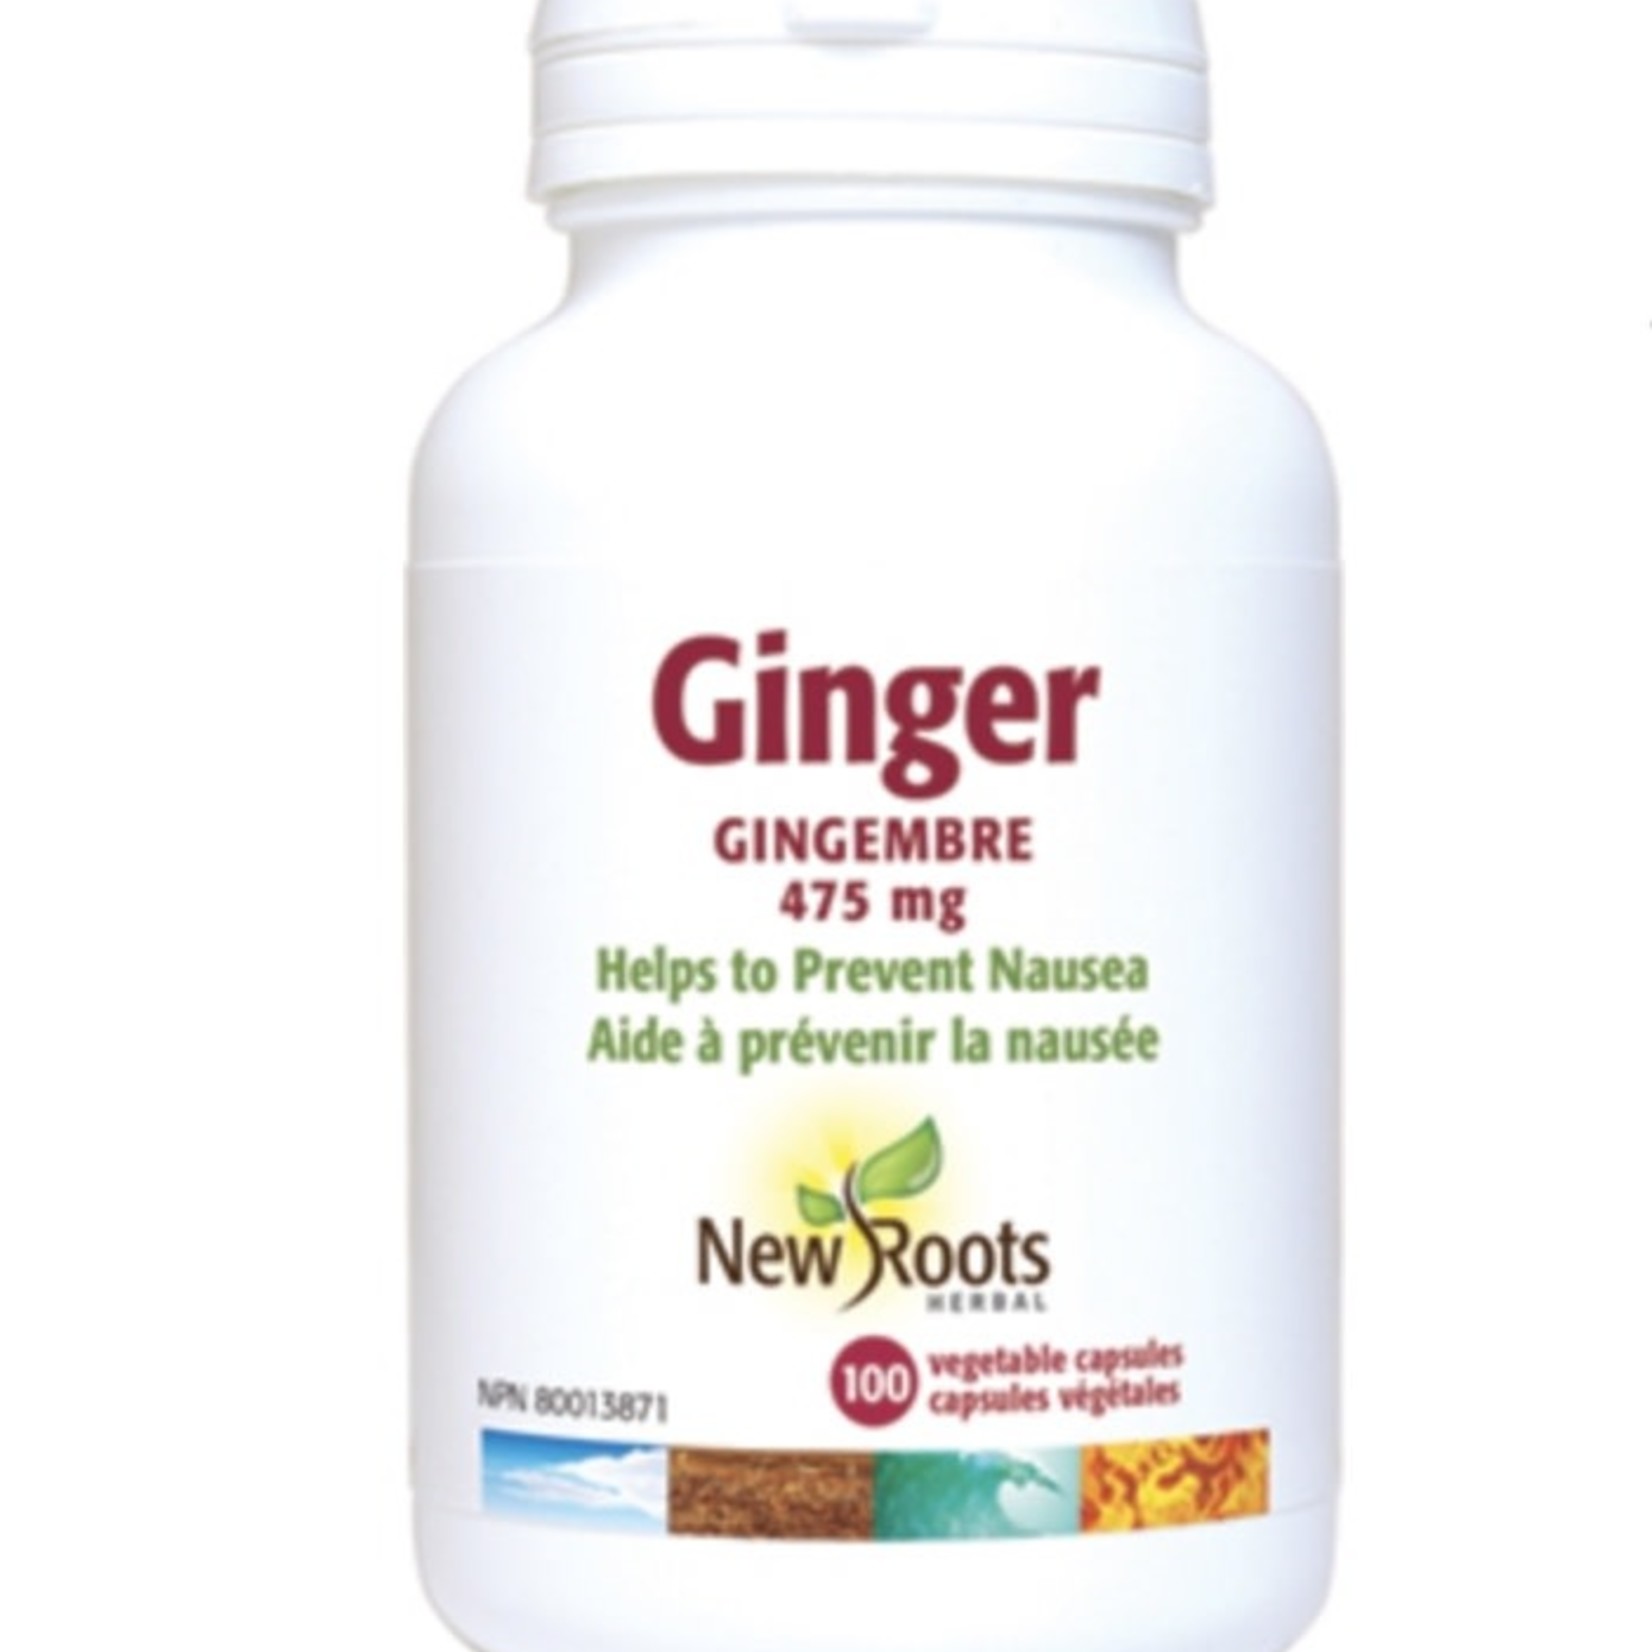 New Roots New Roots Ginger 475mg 100 capsules